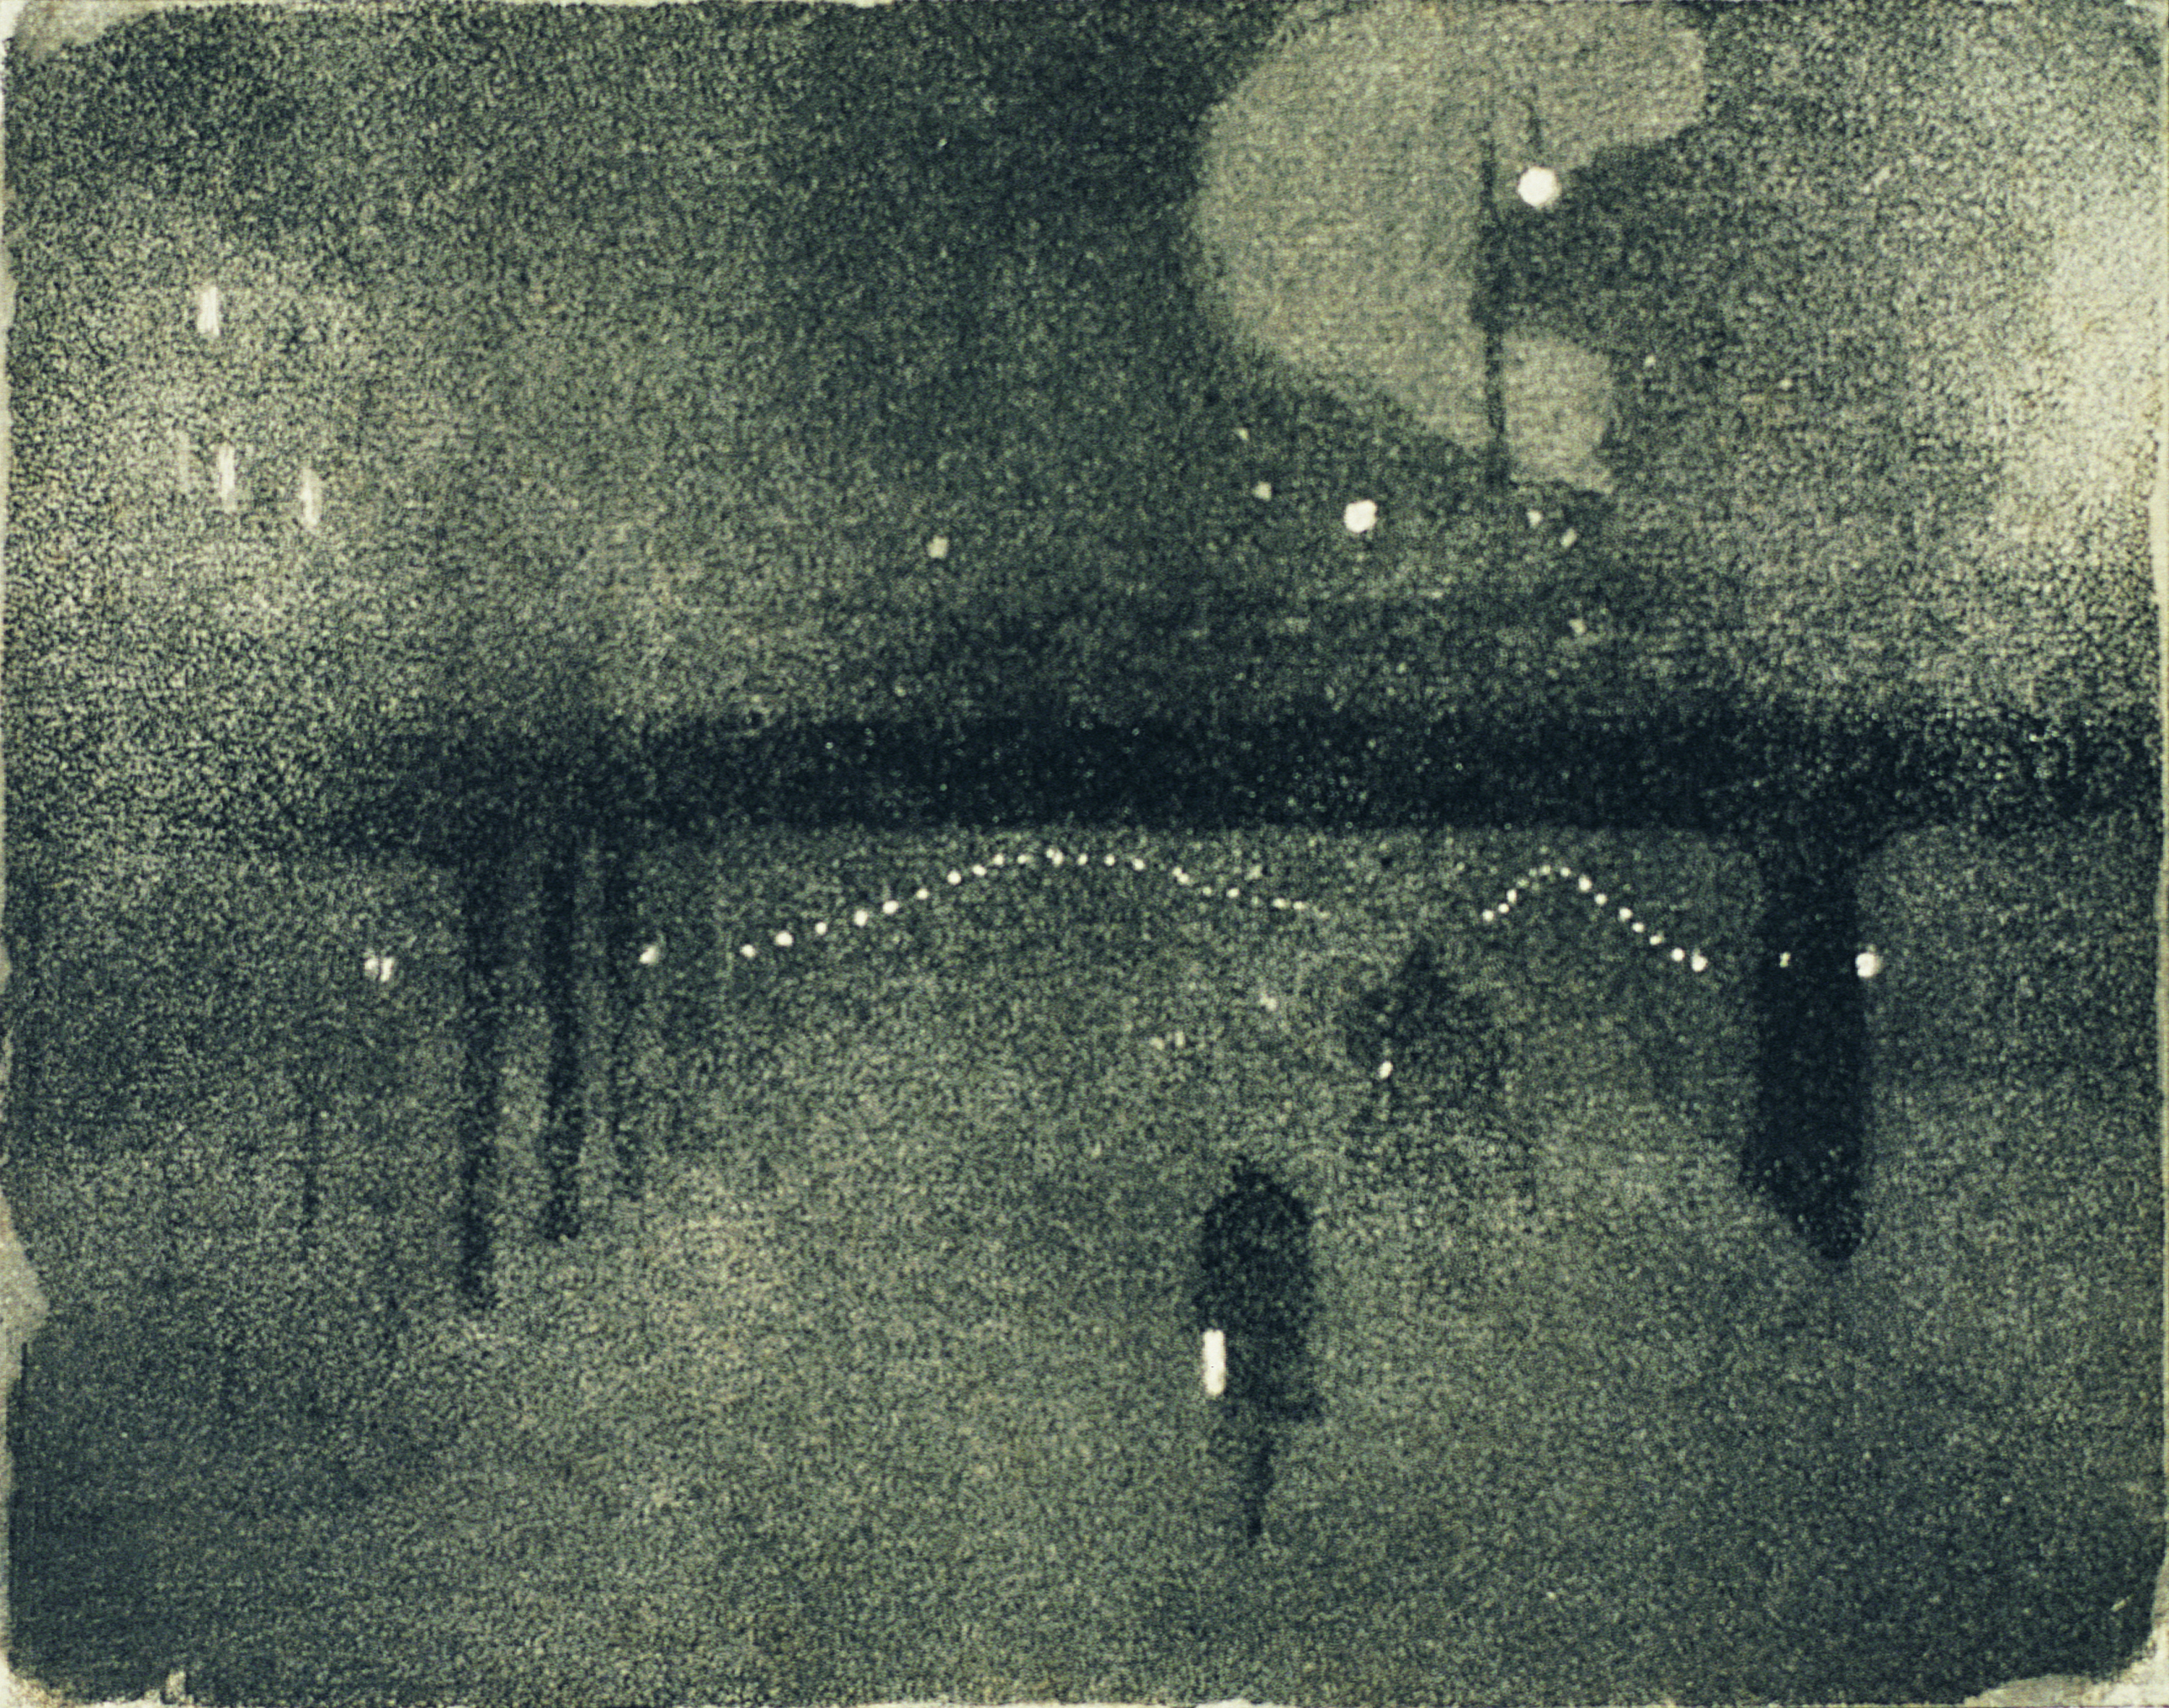 Jessie TRAILL, Avenue du Maine 1908, aquatint. QUT Art Collection. Gift of Robert Gibson under the Cultural Gifts Program, 2000